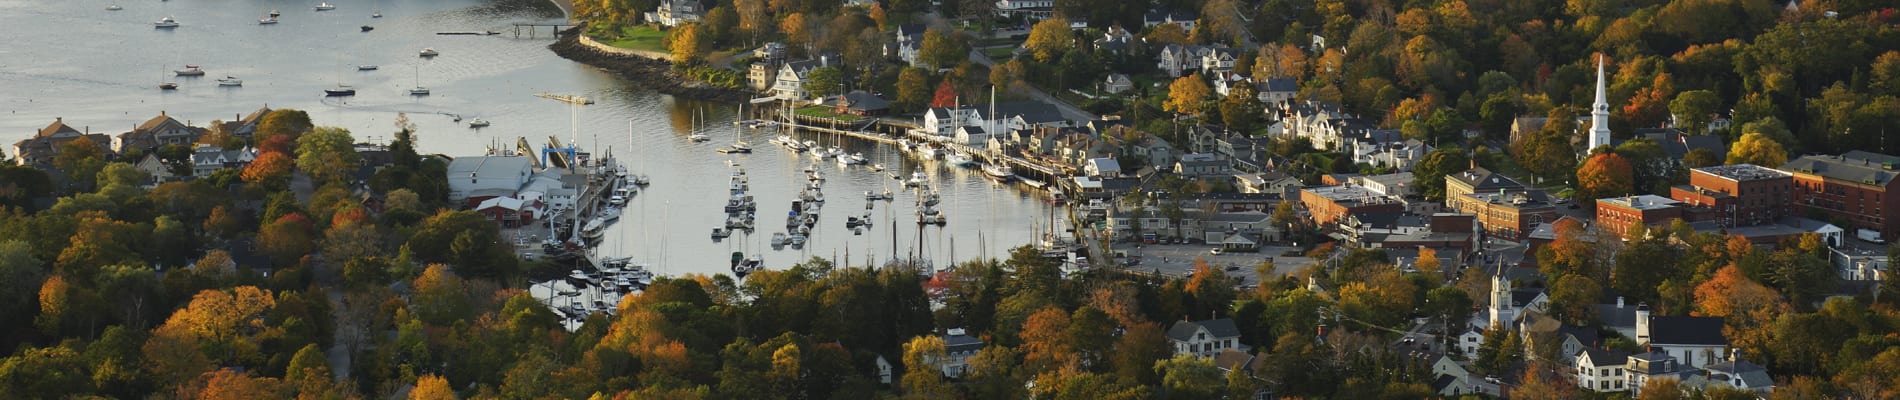 Overhead view of Camden Harbor in the Fall